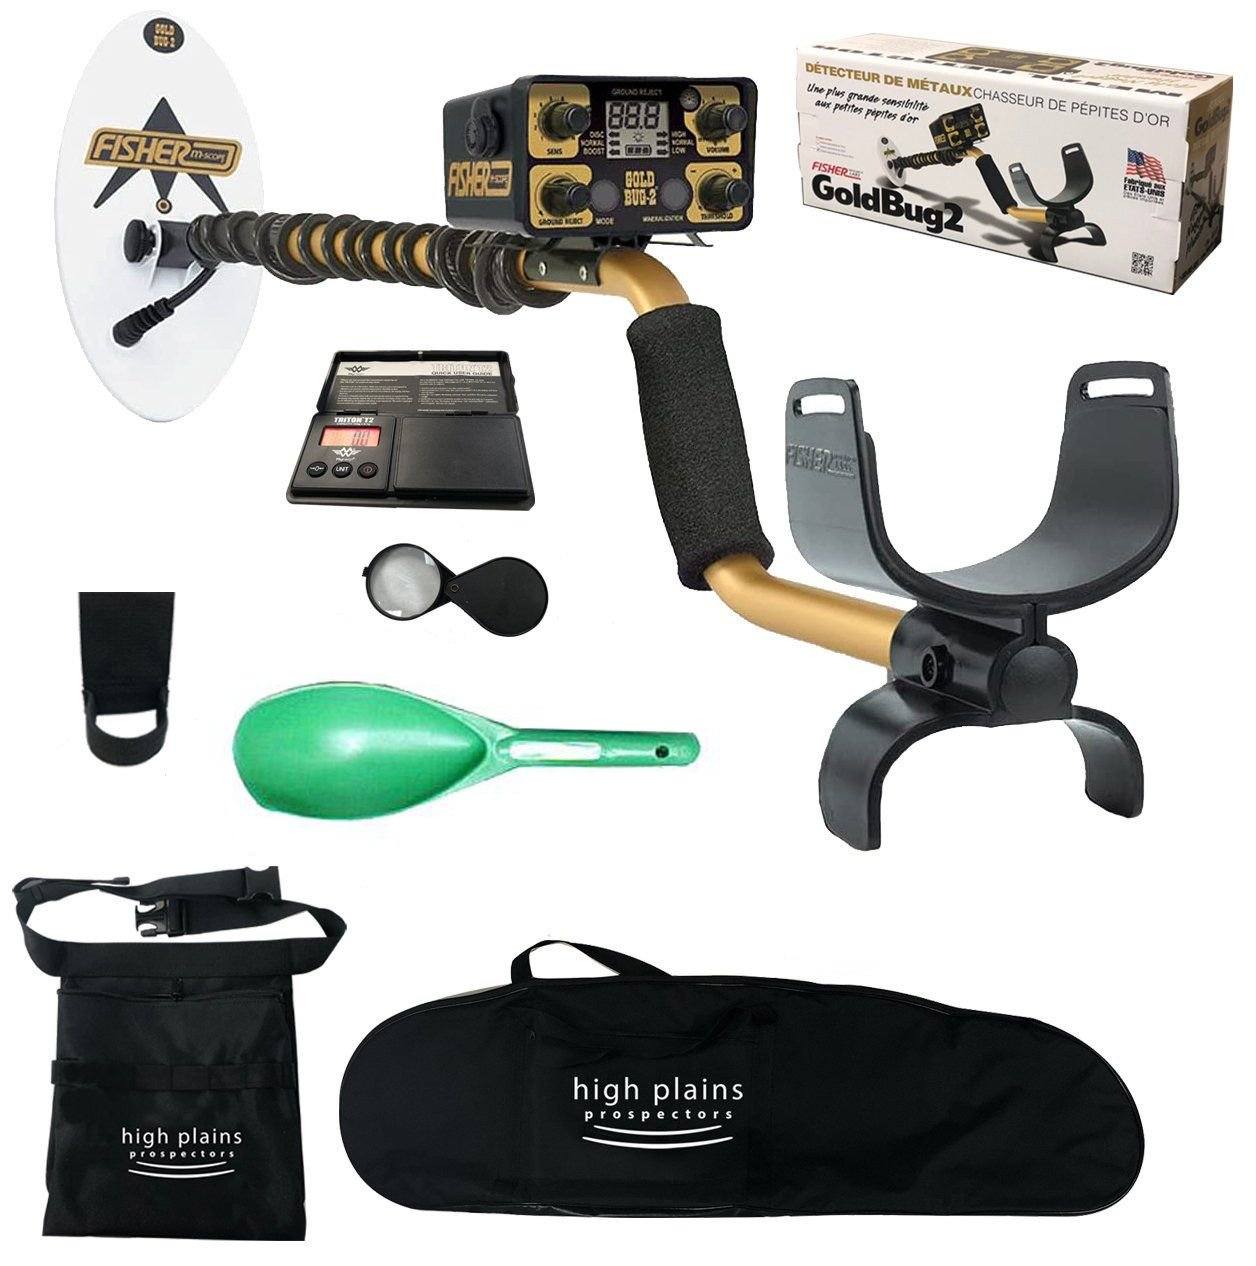 Fisher Gold Bug 2 Metal Detector, 6.5" Elliptical Search Coil and Free Gear w Carry Bag